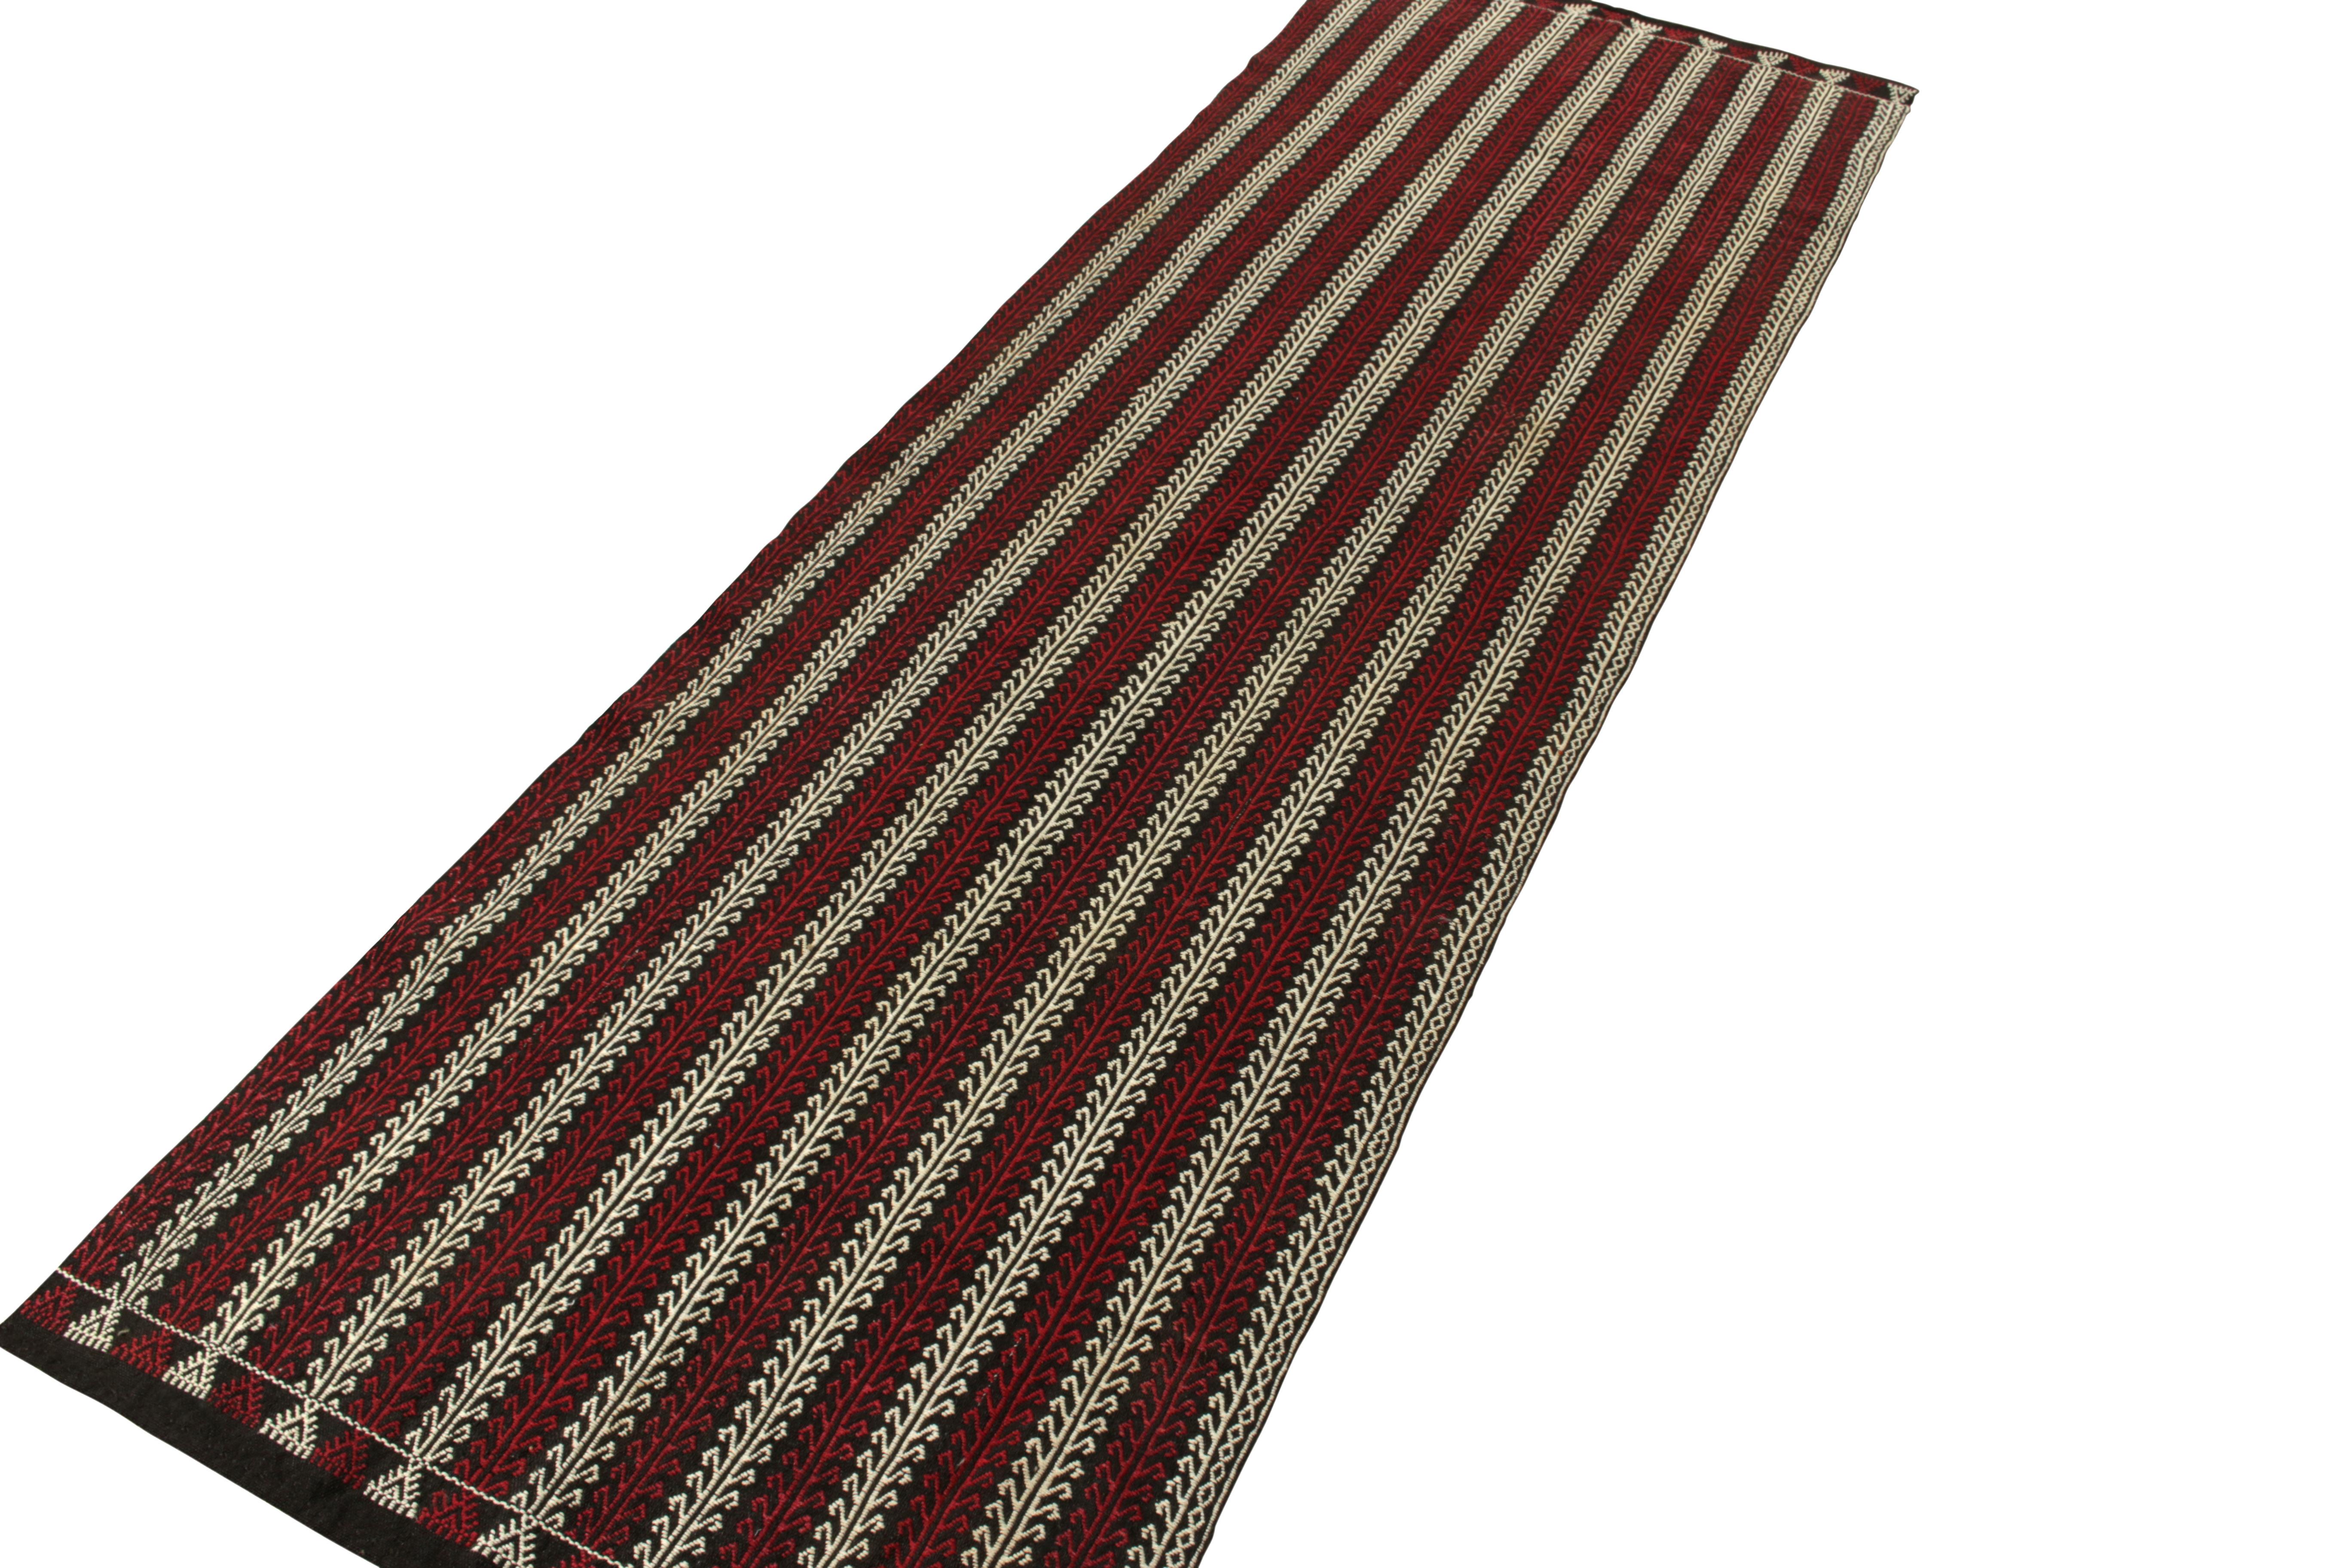 Hand-Knotted Vintage Turkish Kilim Runner in Black, White Embroidered Stripes by Rug & Kilim For Sale